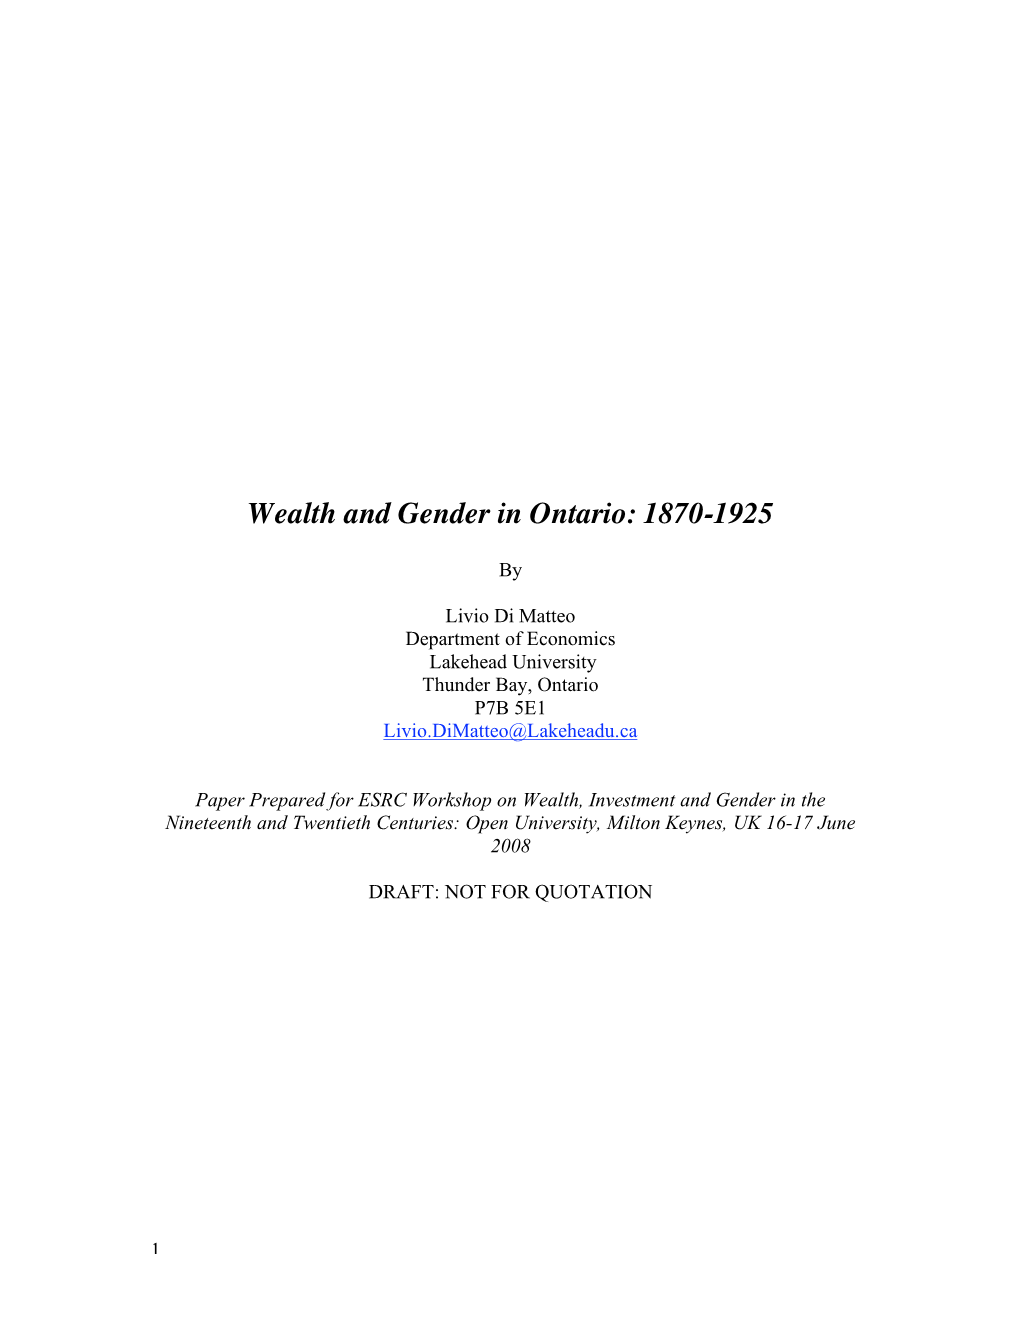 Wealth and Gender in Ontario: 1870-1925